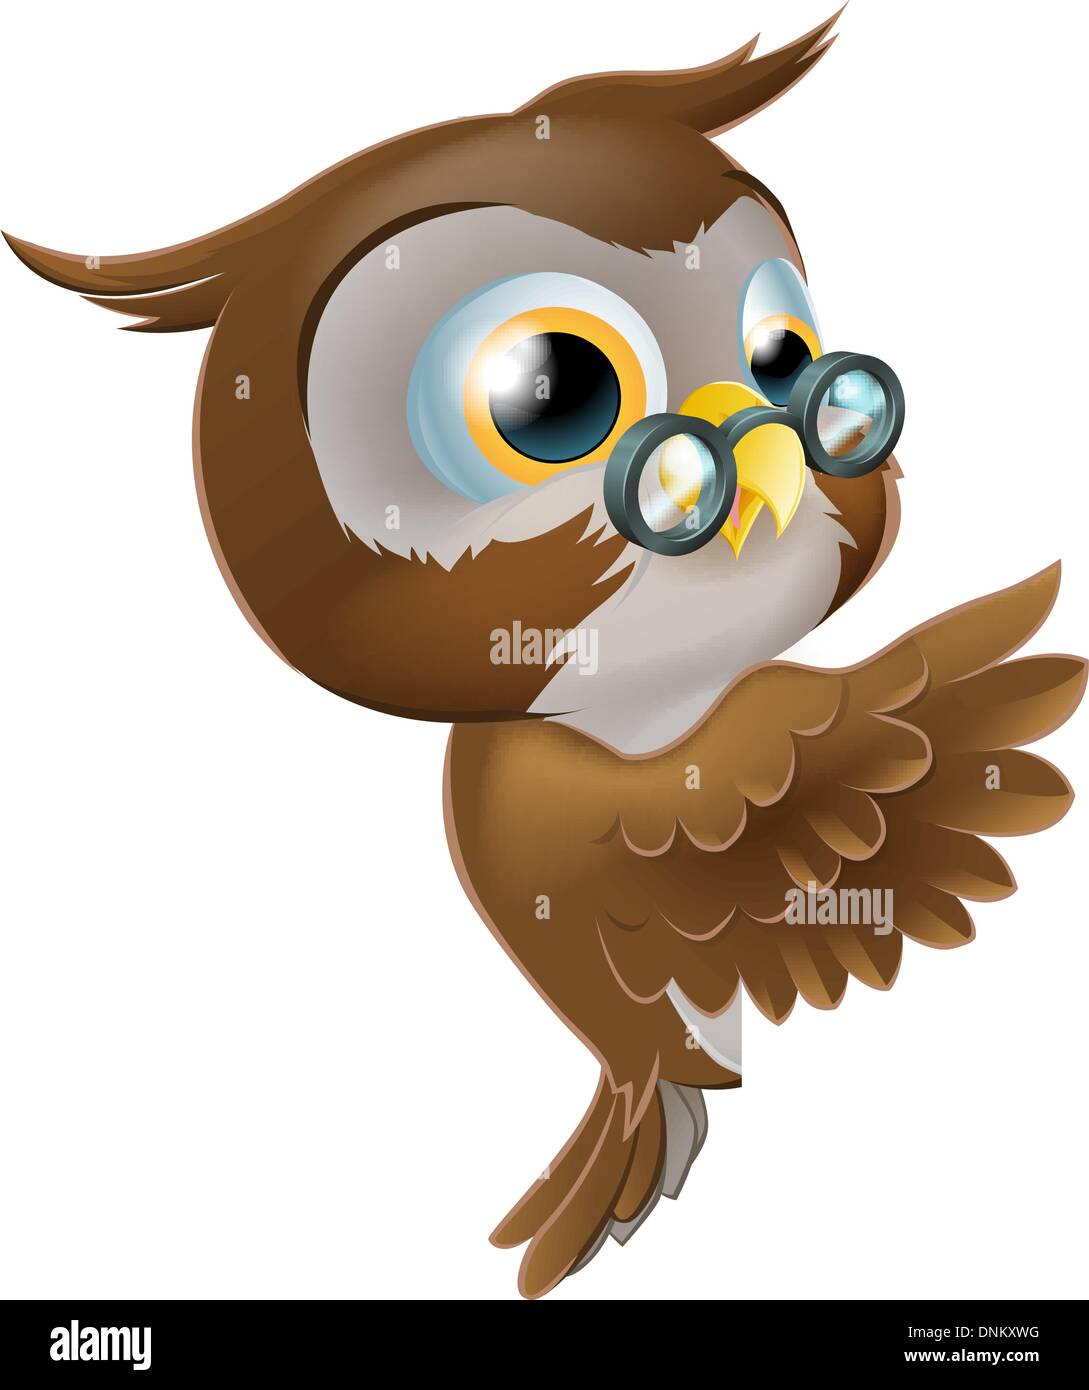 An illustration of a cute cartoon wise owl character with glasses peeking round from behind a sign and pointing or showing what  Stock Vector